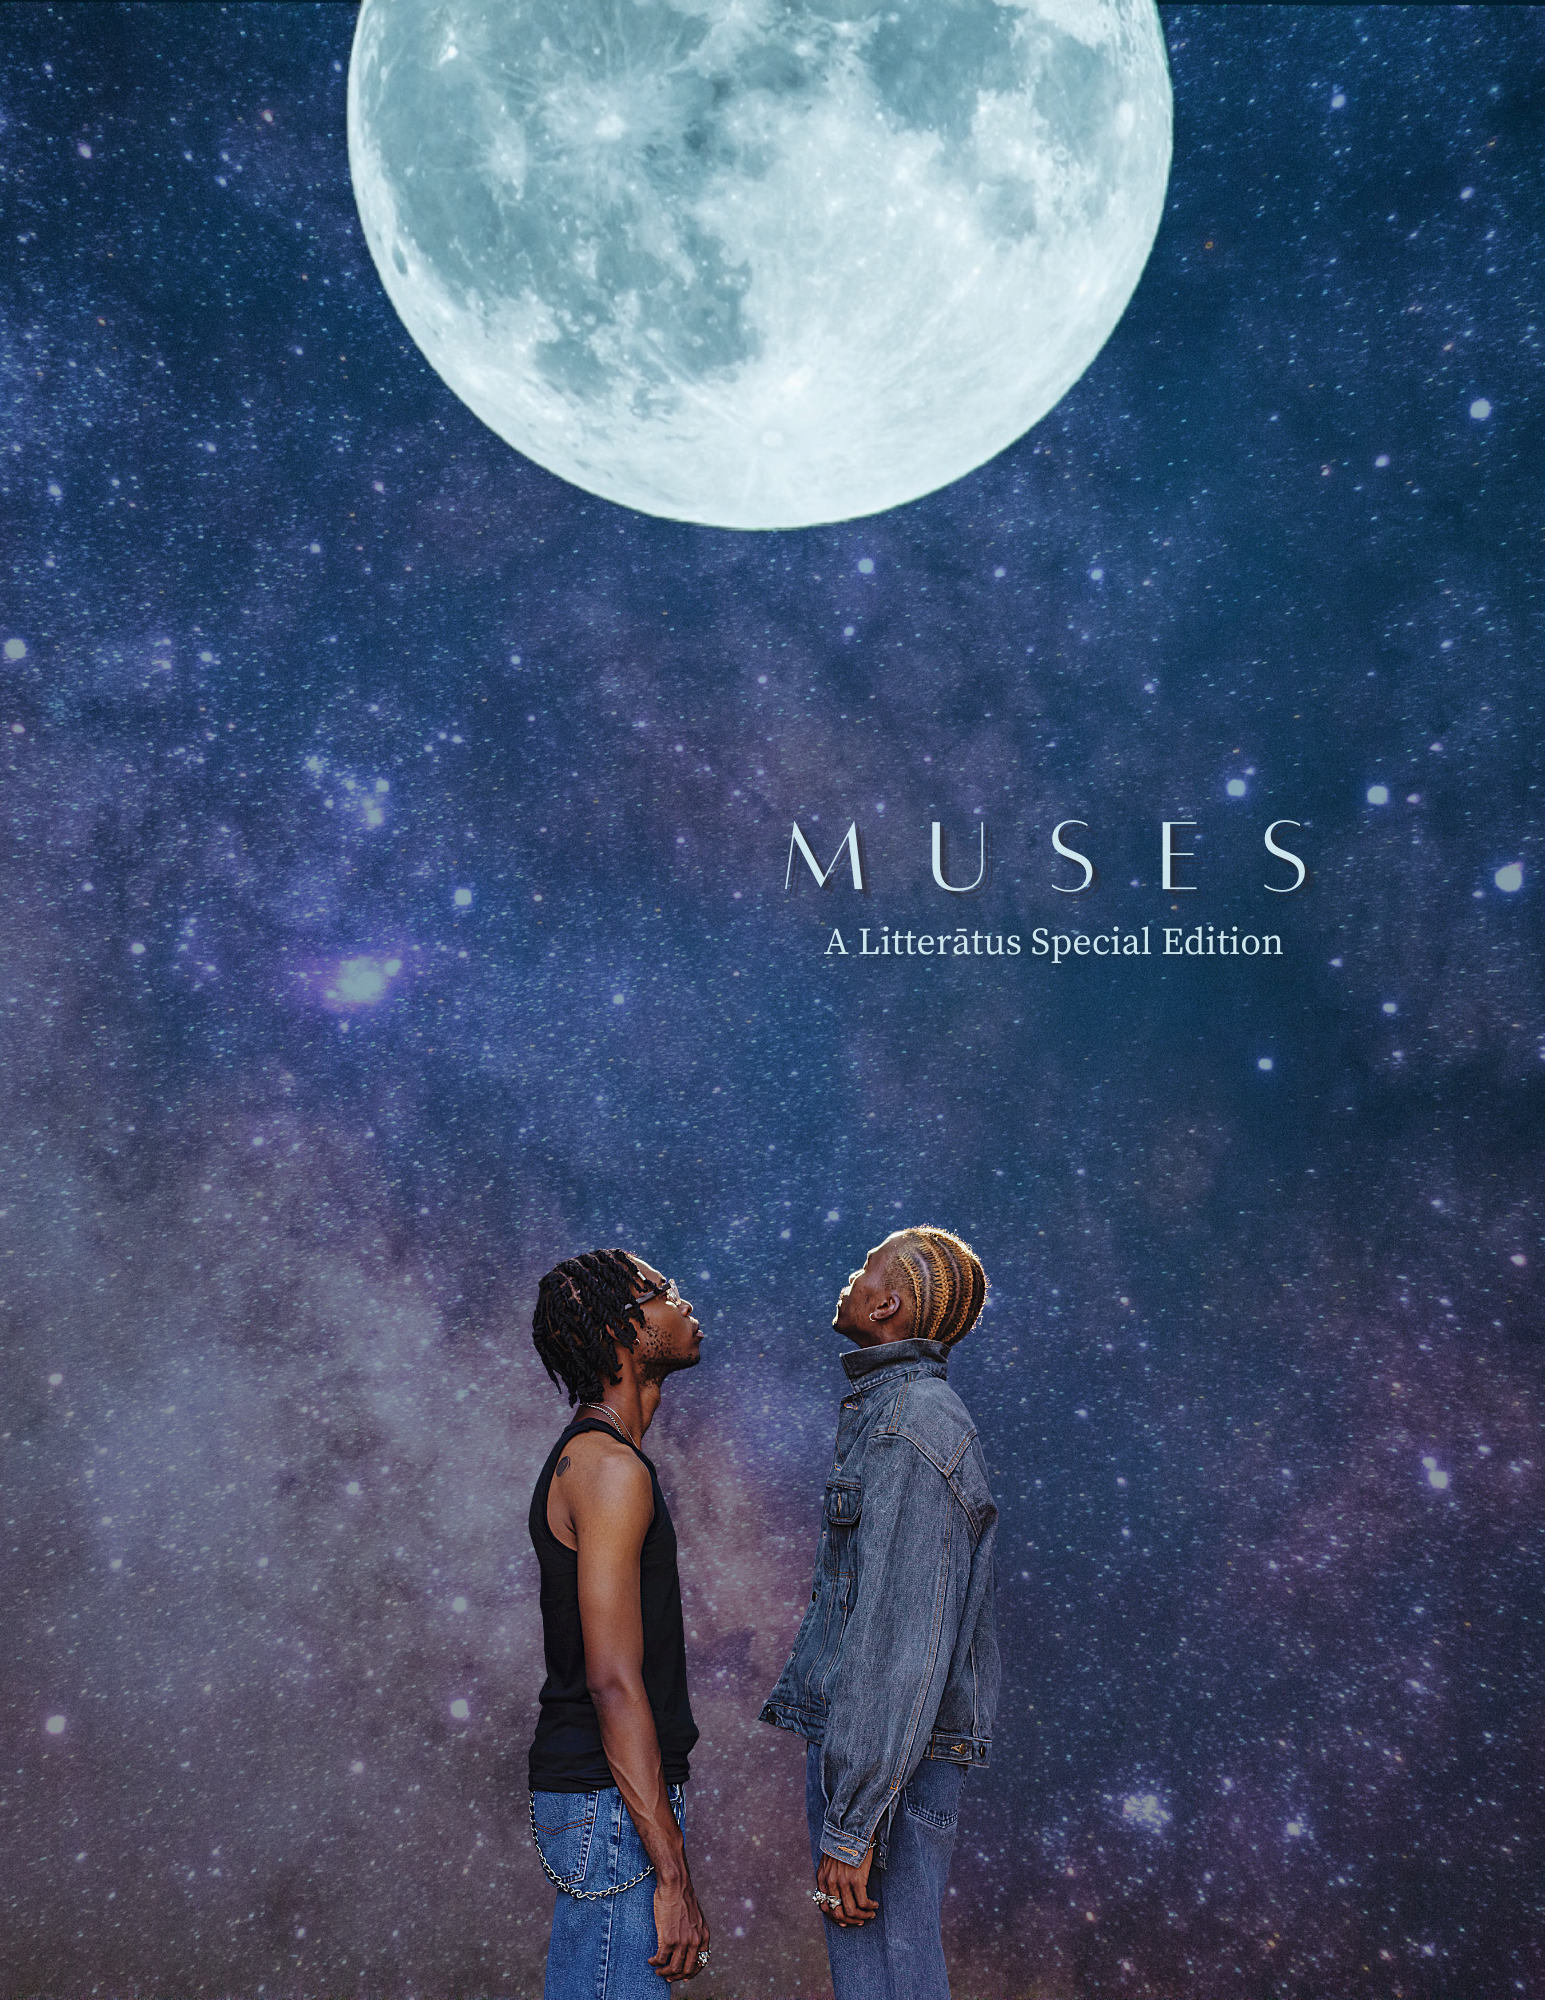 Two brown skin people standing in front of stars looking up at the moon. Muses, A Litteratus Special Edition is in front of the starry sky backdrop.